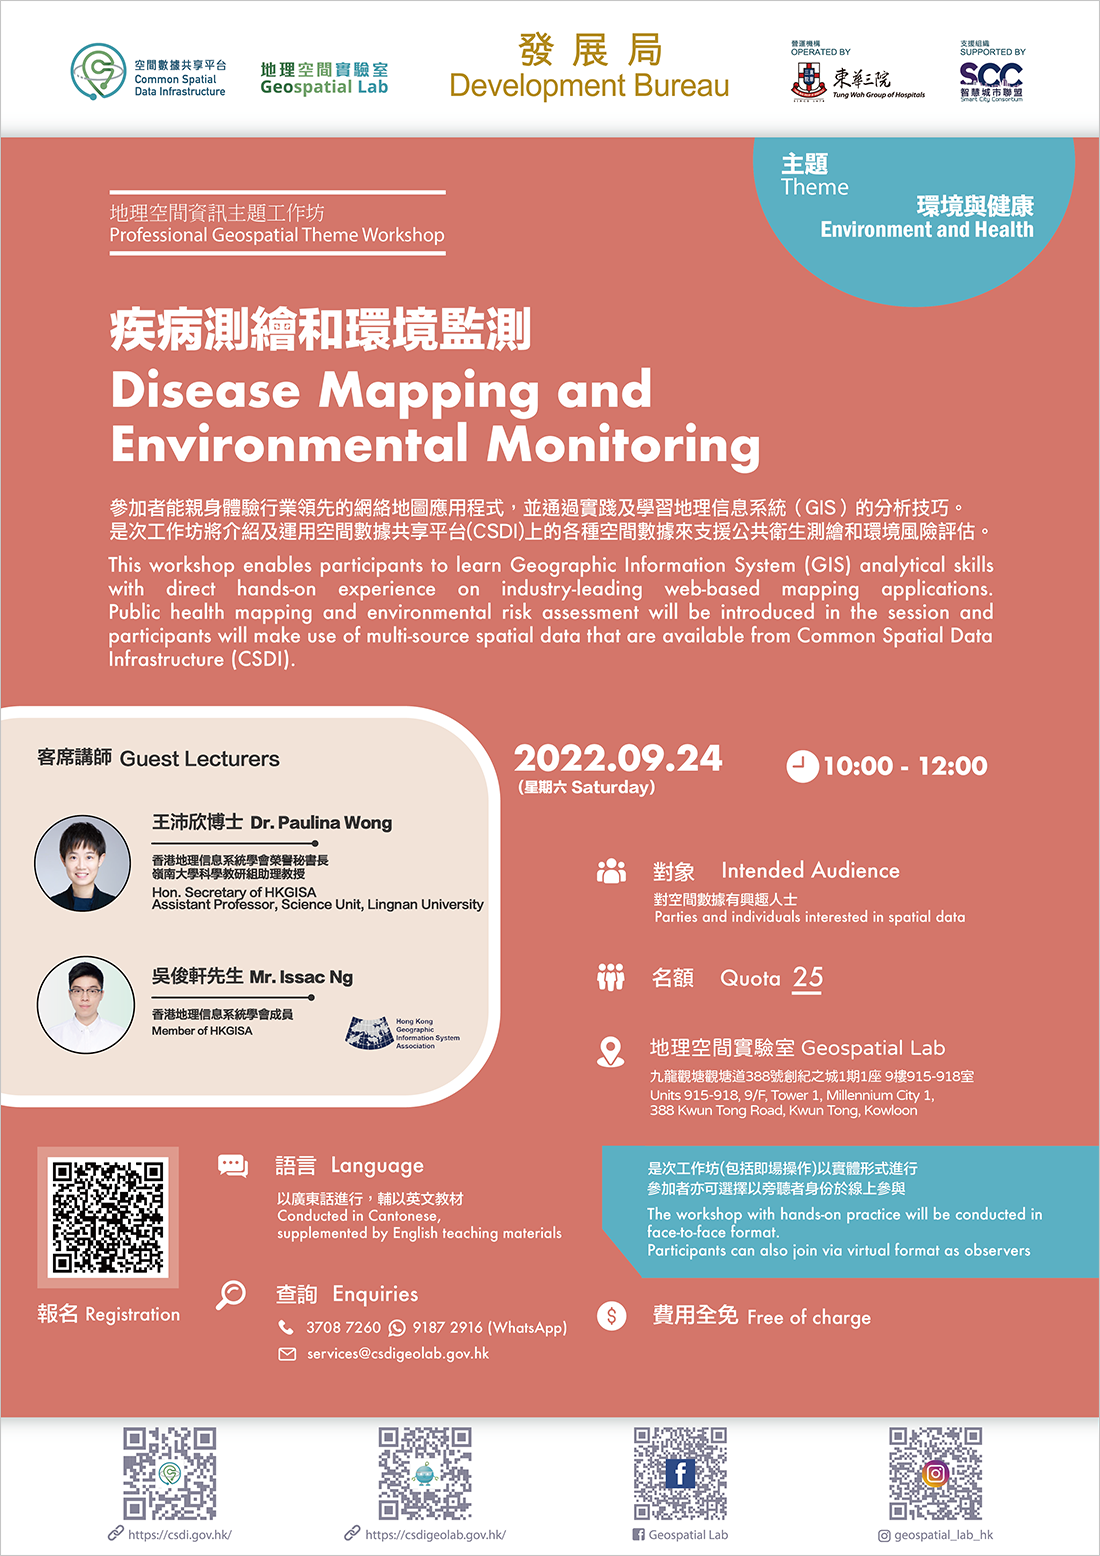 Poster of Professional Geospatial Theme Workshop - Disease Mapping and Environmental Monitoring